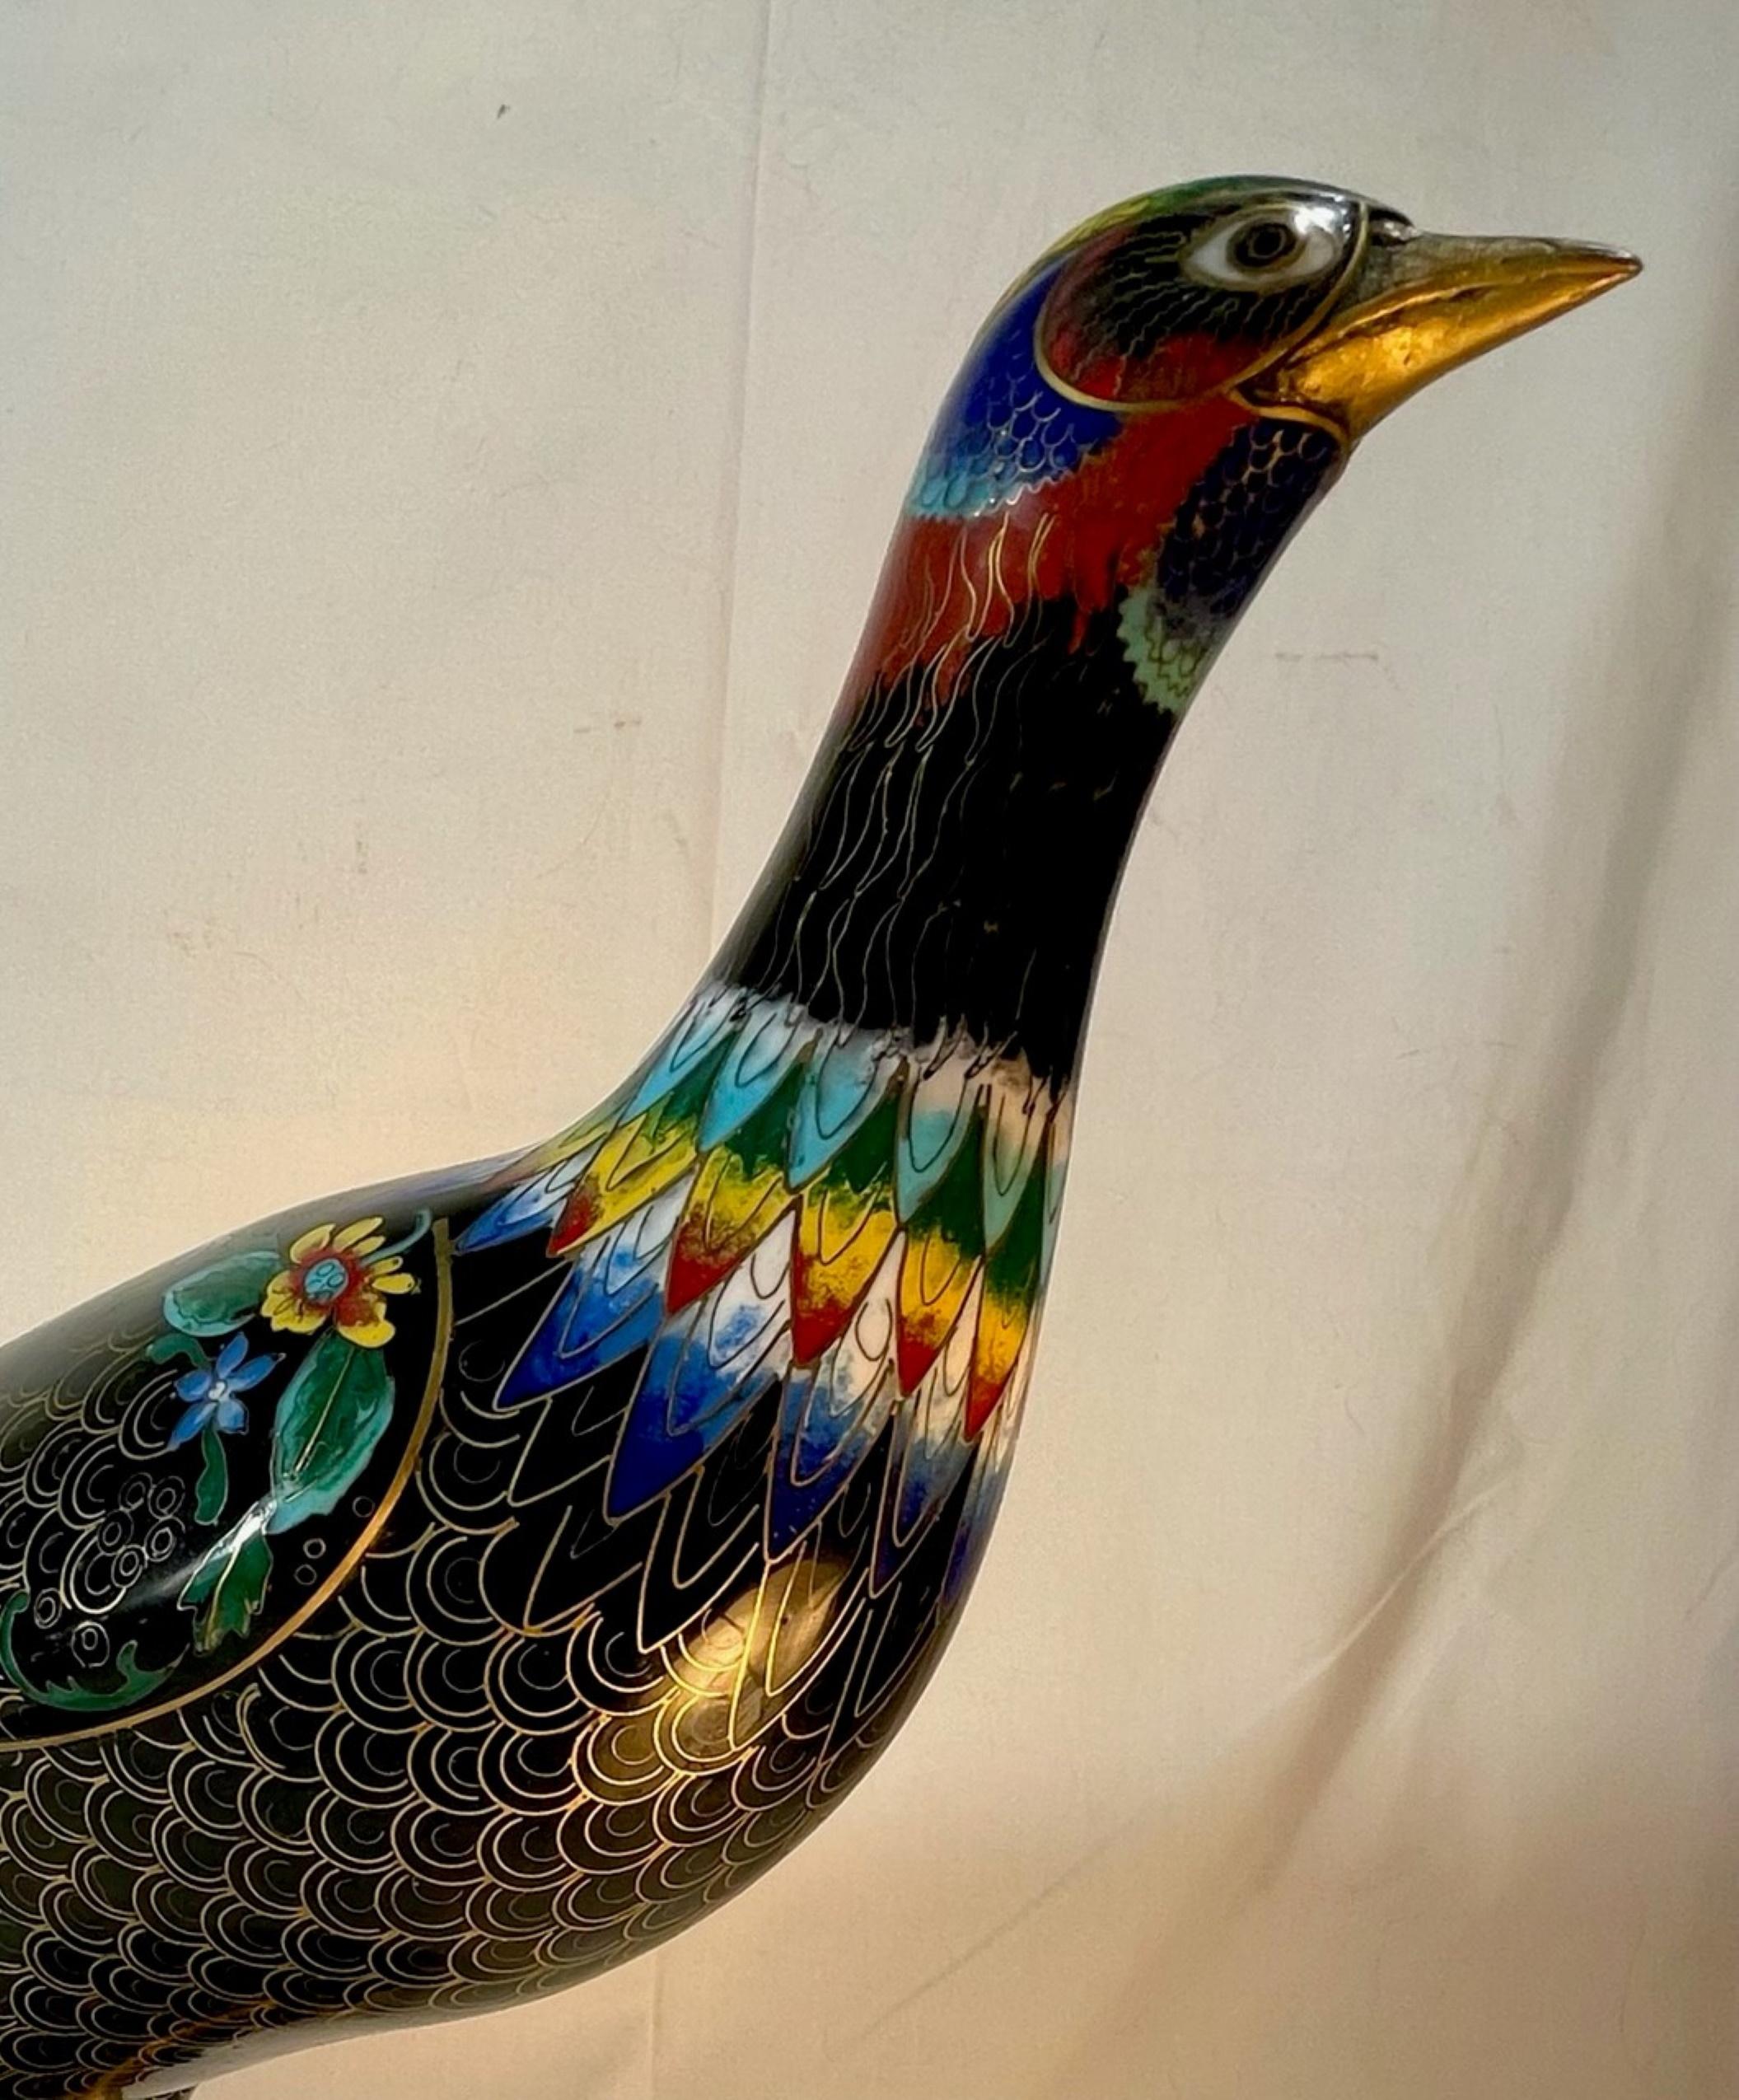 Large Chinese Cloisonne Enamel Pheasant vintage sculpture

A large and exceptional vintage cloisonne pheasant enameled in black, gold with multiple vibrant and beautiful accent colors. Tasteful details abound and include brass claws, feather